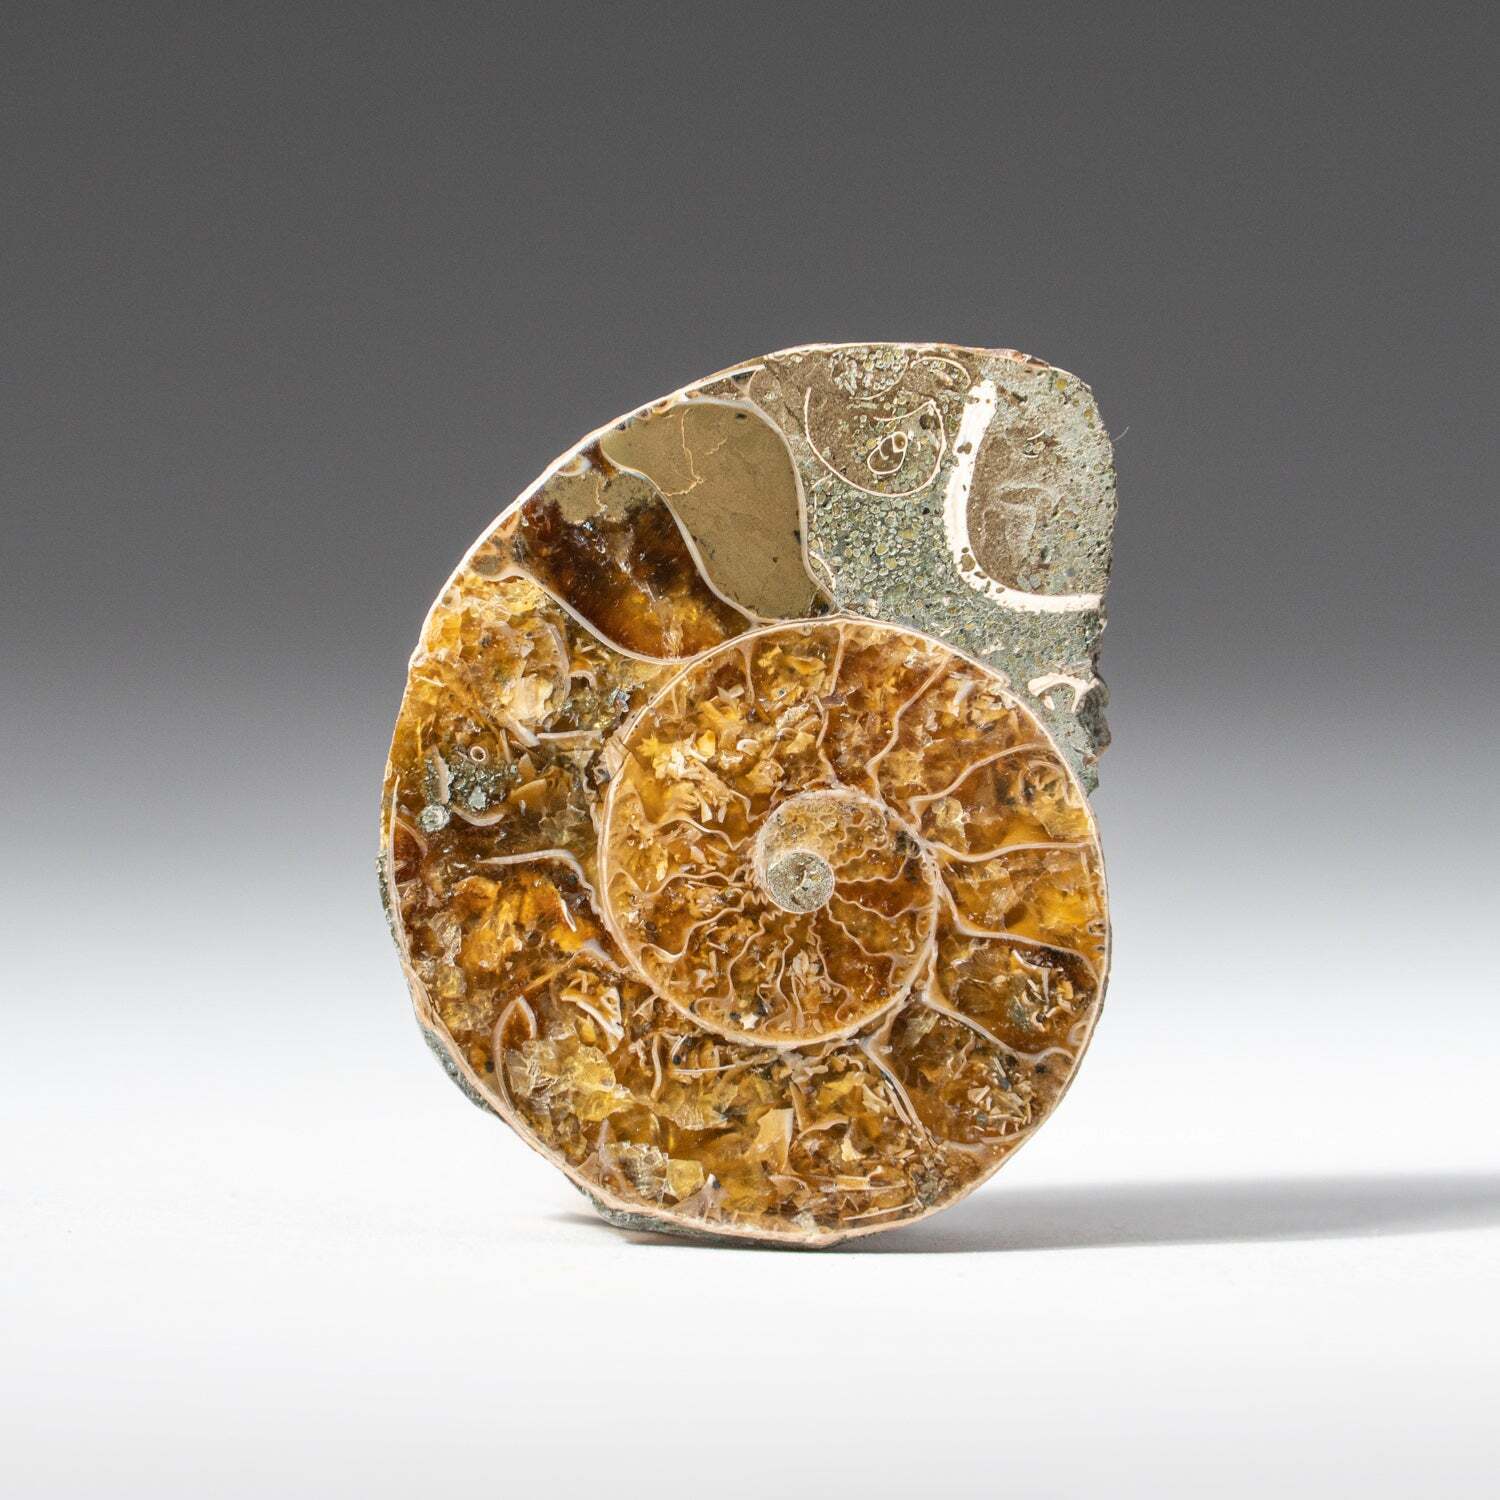 Calcified Ammonite Half From Madagascar (10 G)